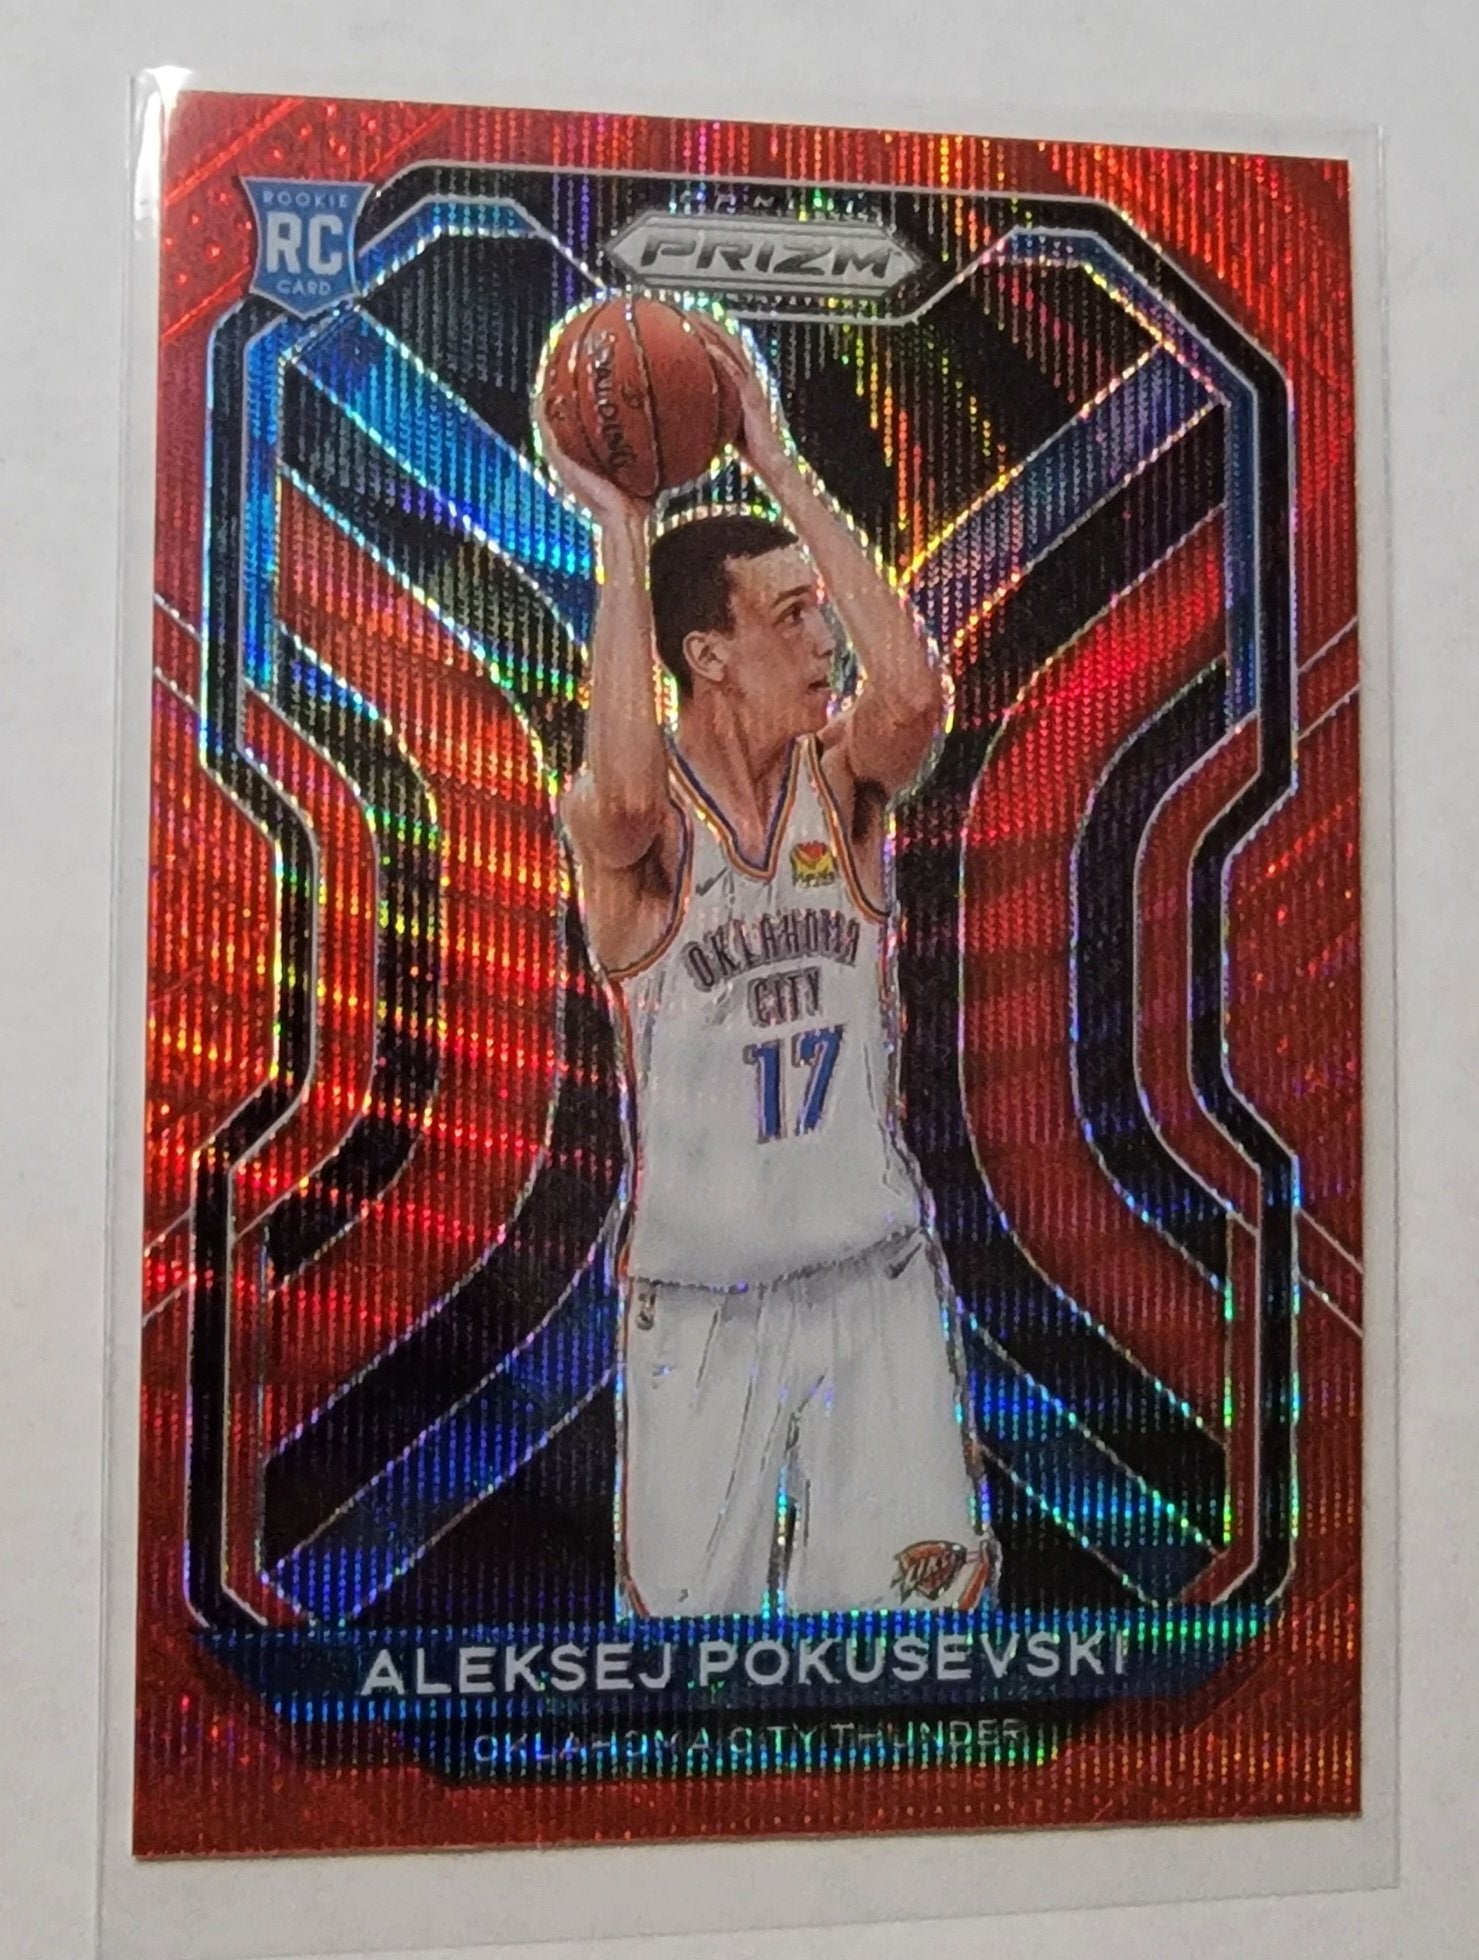 2020-21 Panini Prizm Alexsej Pokusevski Rookie Red Hyper Refractor Basketball Card AVM1 simple Xclusive Collectibles   